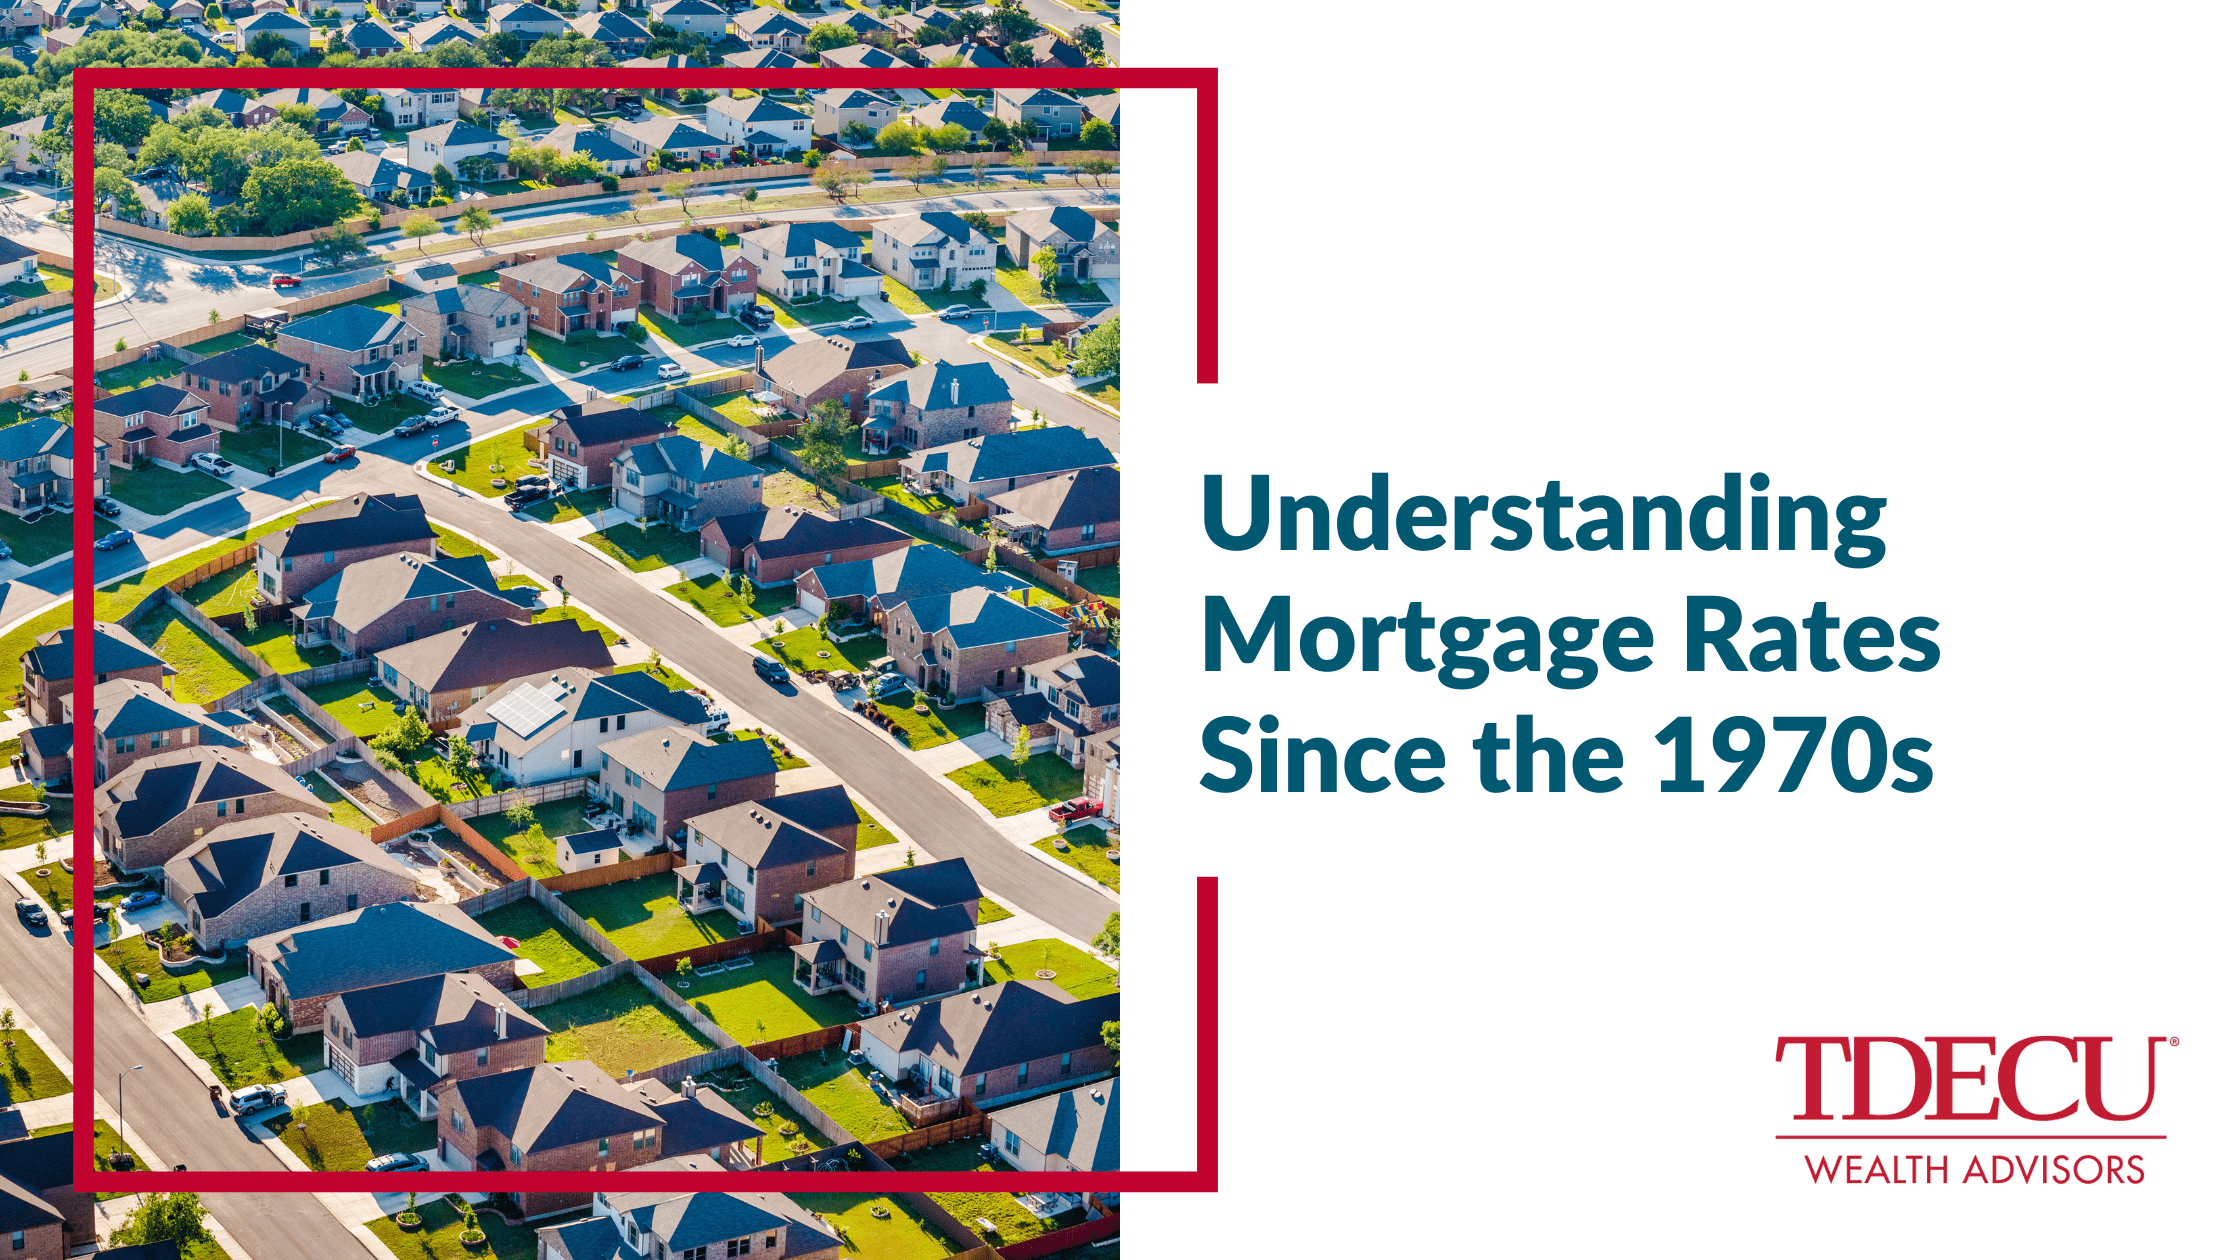 Understanding Mortgage Rates Since the 1970s